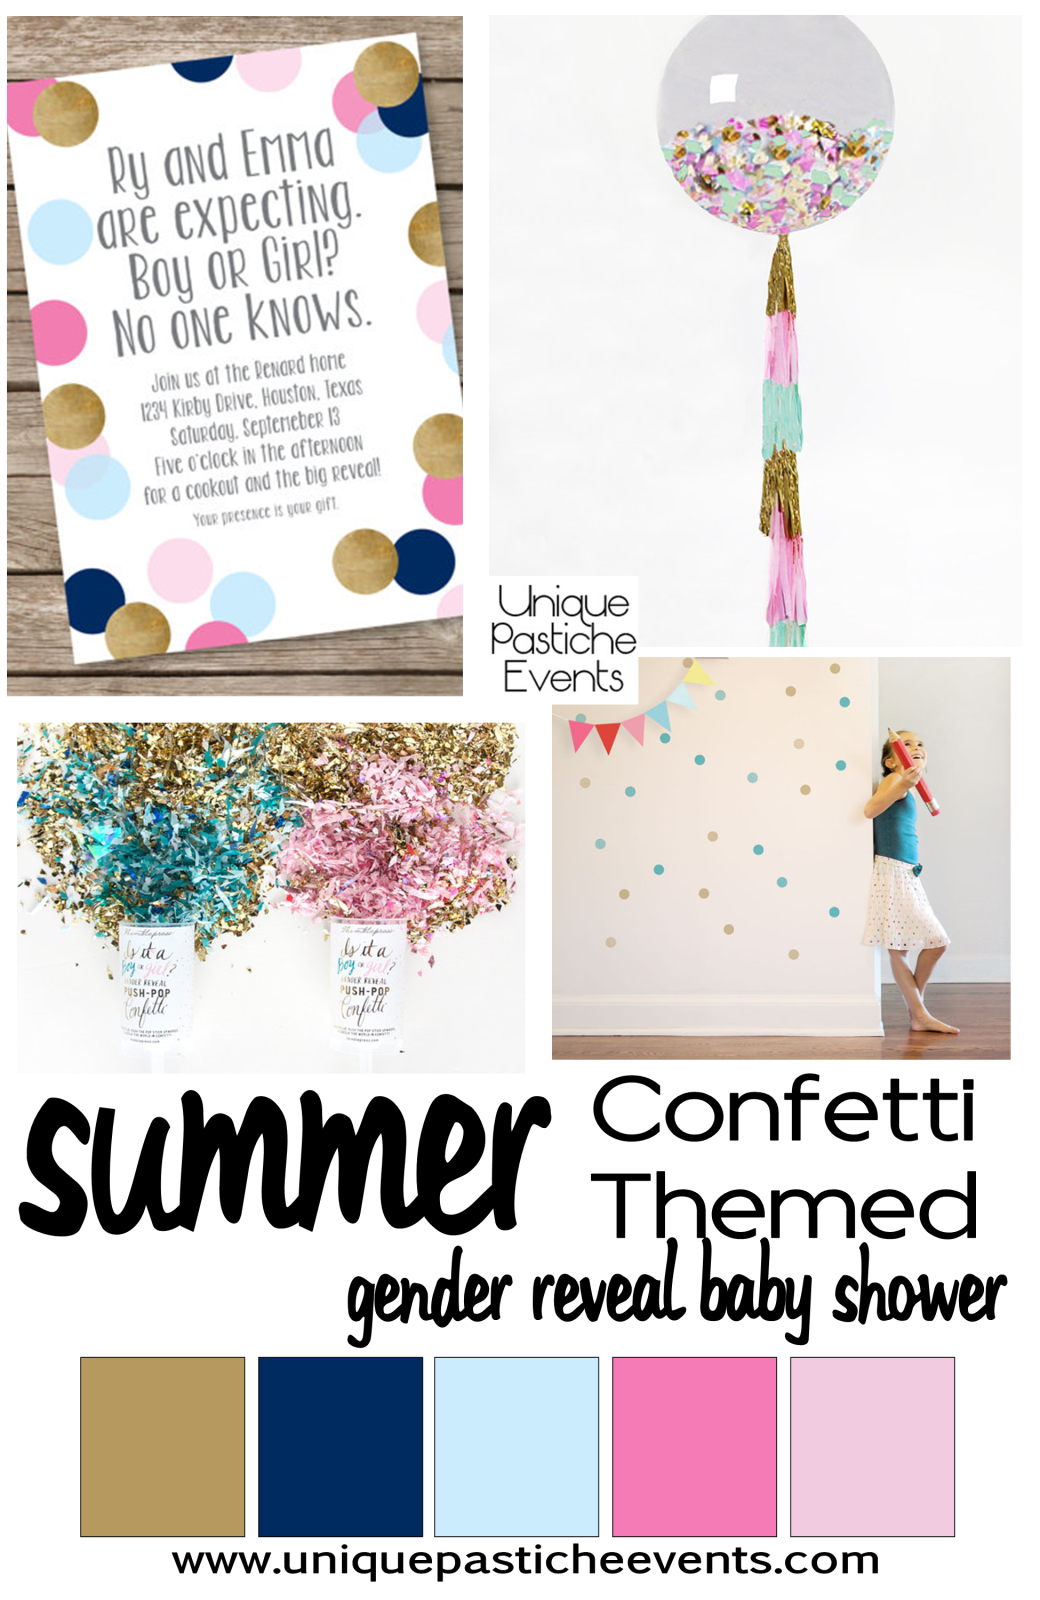 Confetti Themed Gender Reveal Baby Shower